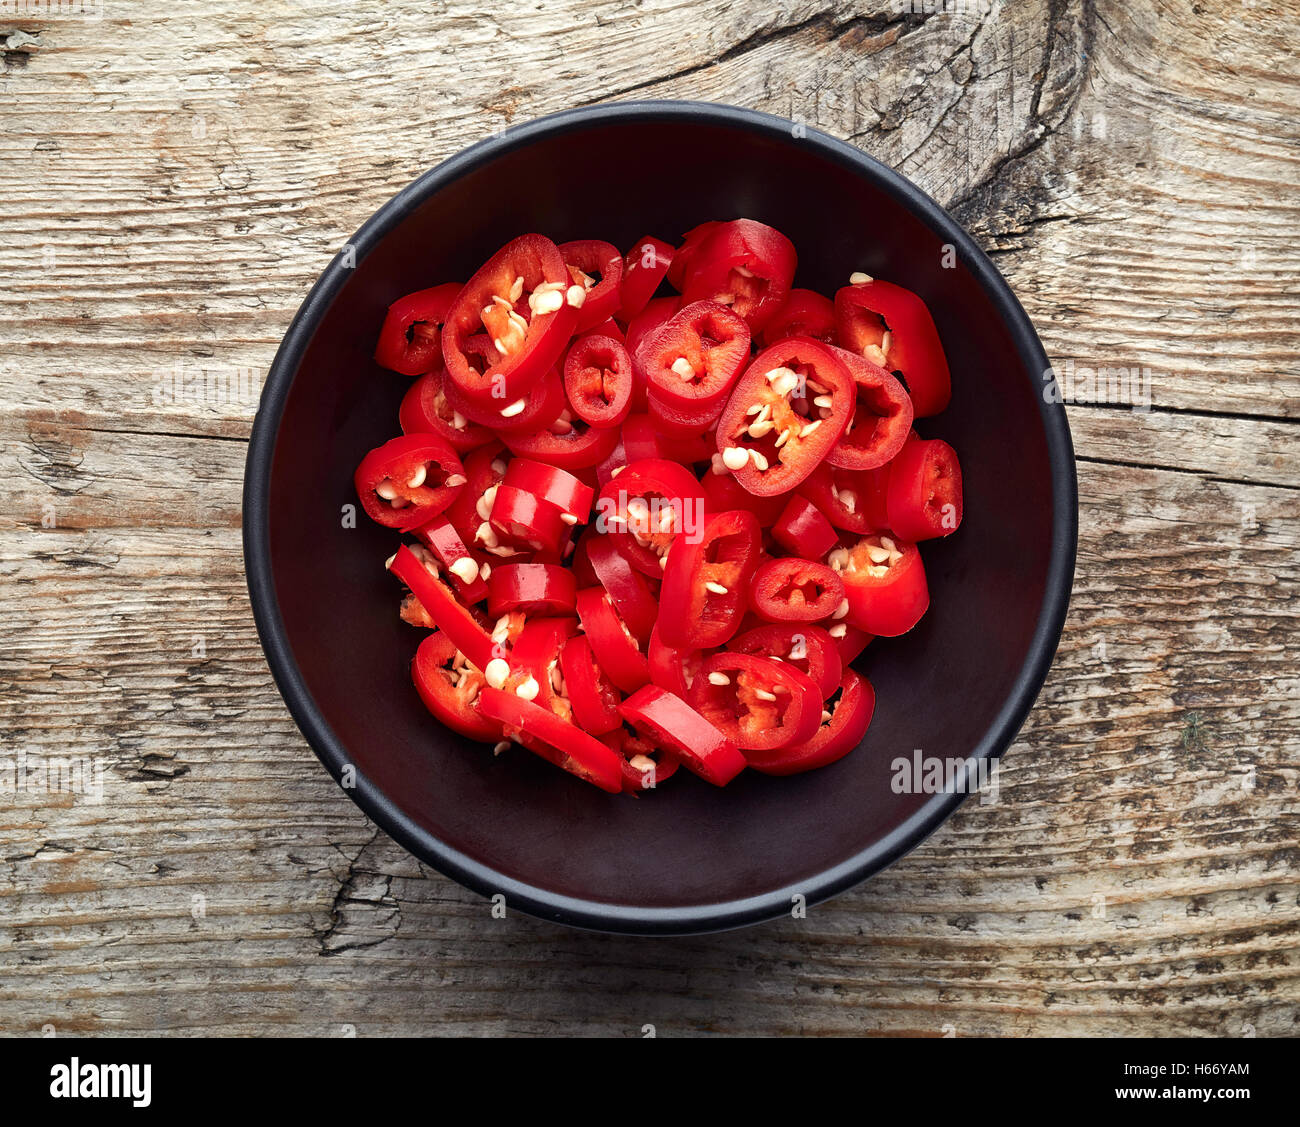 Bowl of red hot chili pepper on wooden table, top view Stock Photo